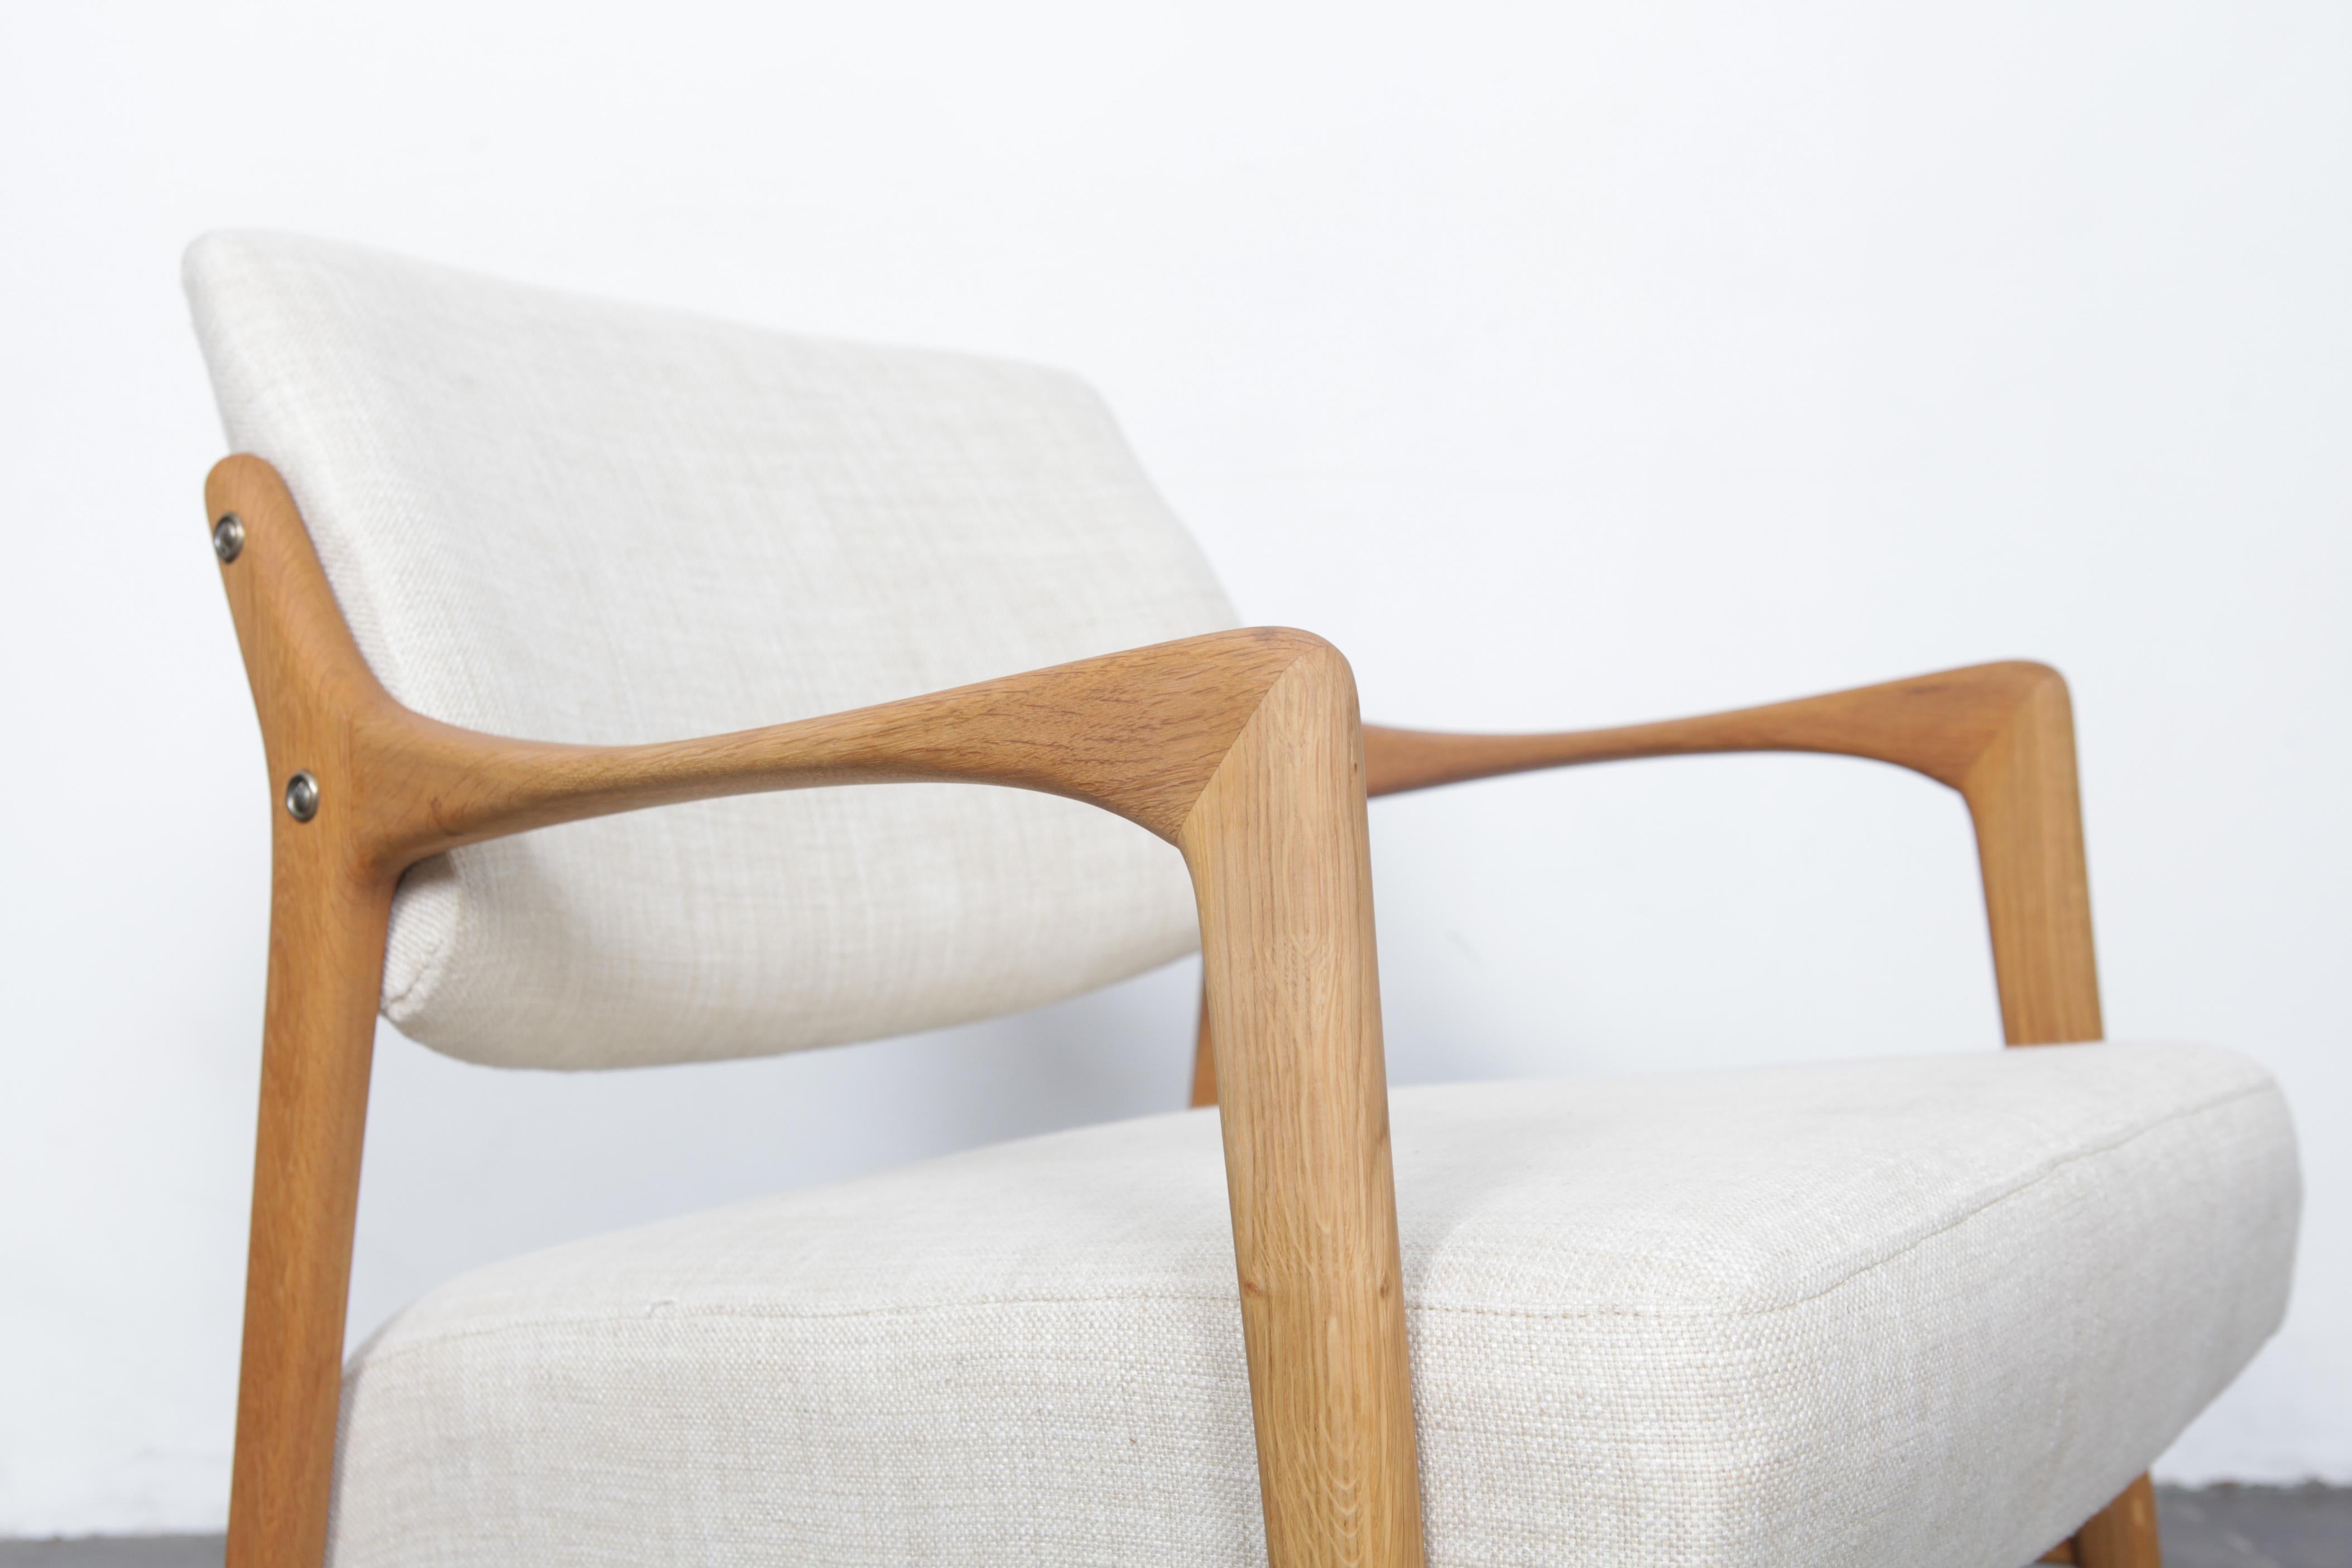 Pair of Swedish Solid Oak Chairs by Inge Andersson for Bröderna Andersson 5